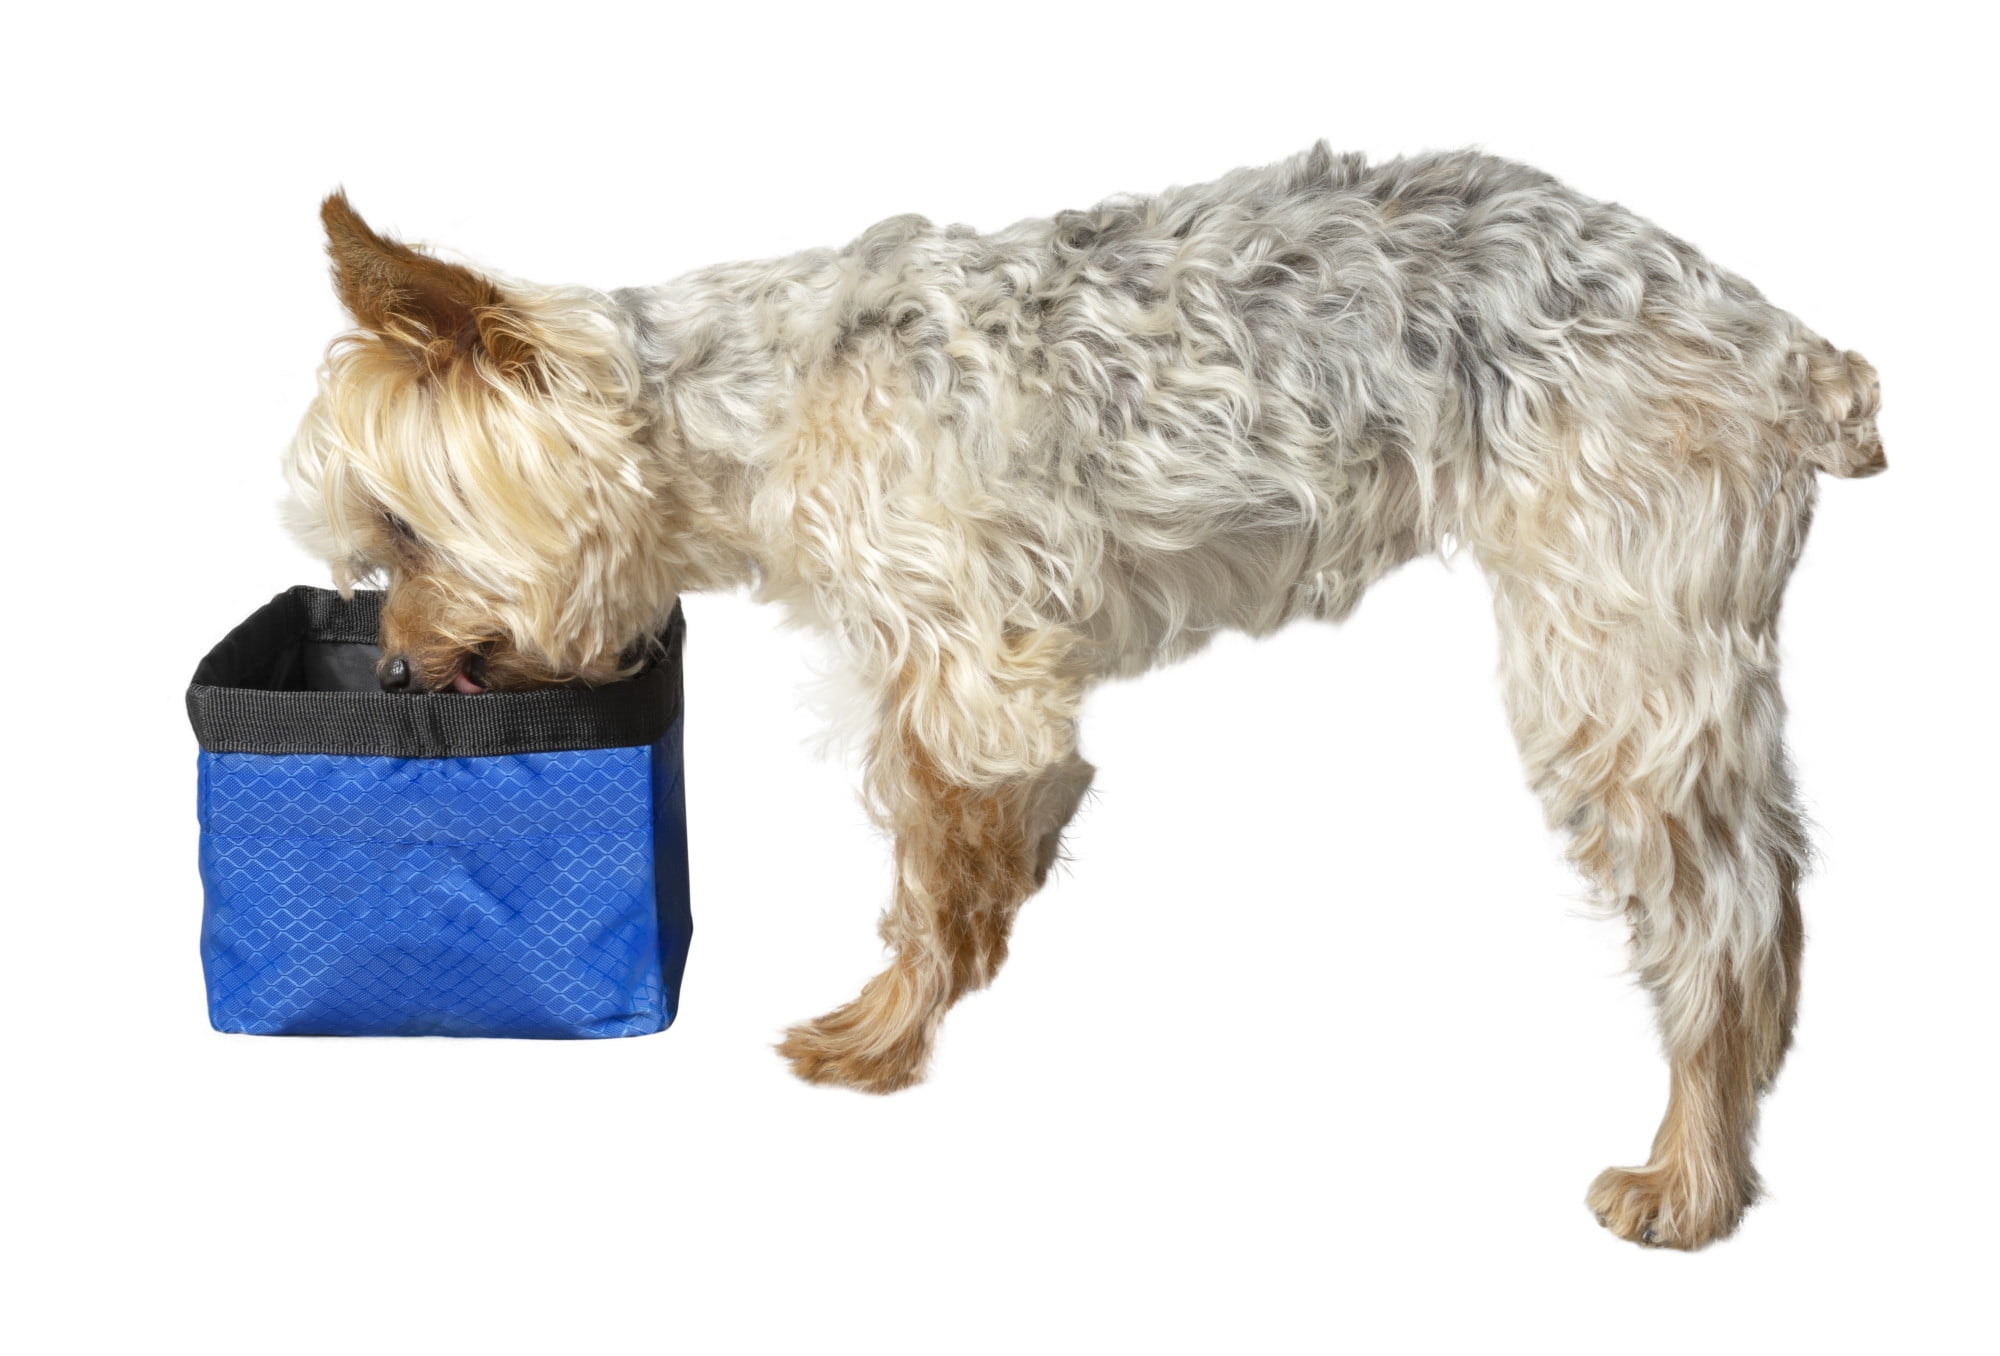 50 SMALL Portable Travel Collapsible Pet/Dog Food/Water Bowls 